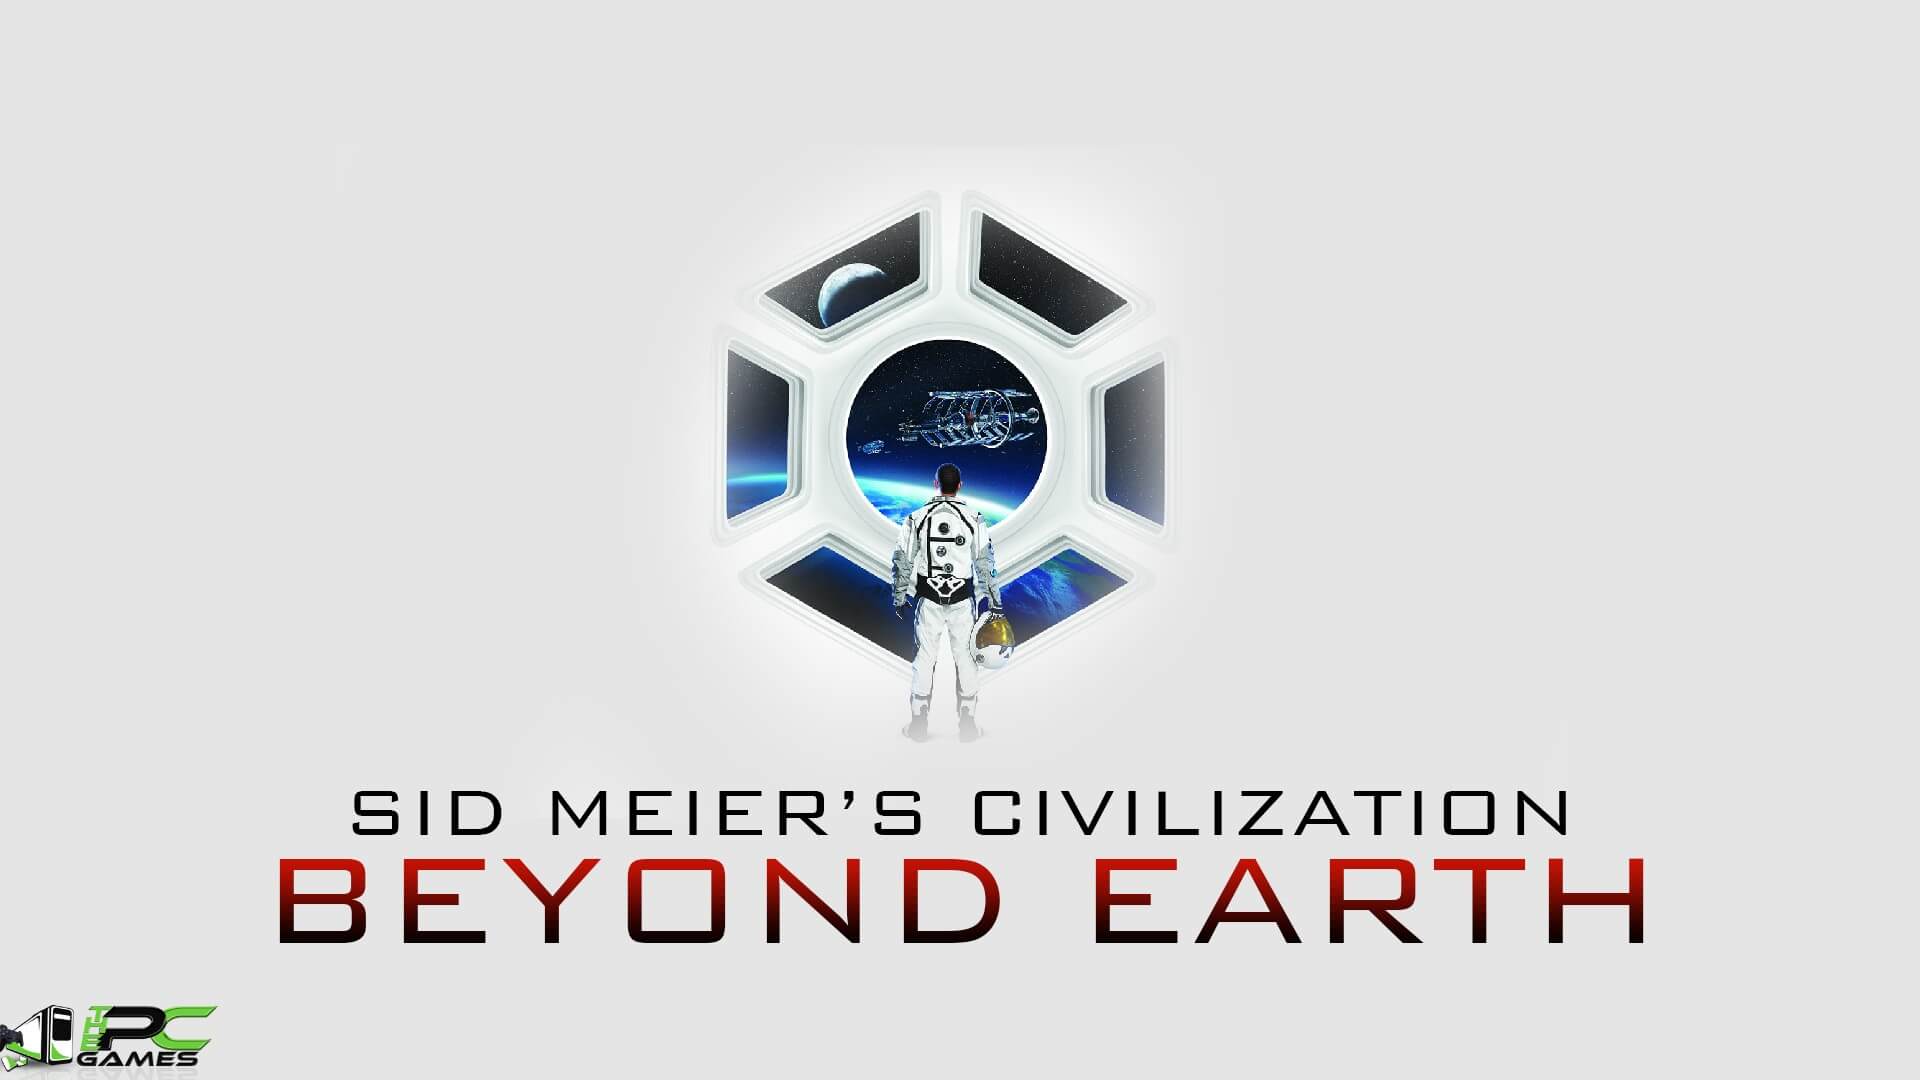 Sid Meier’s Civilization Beyond Earth pc game free download